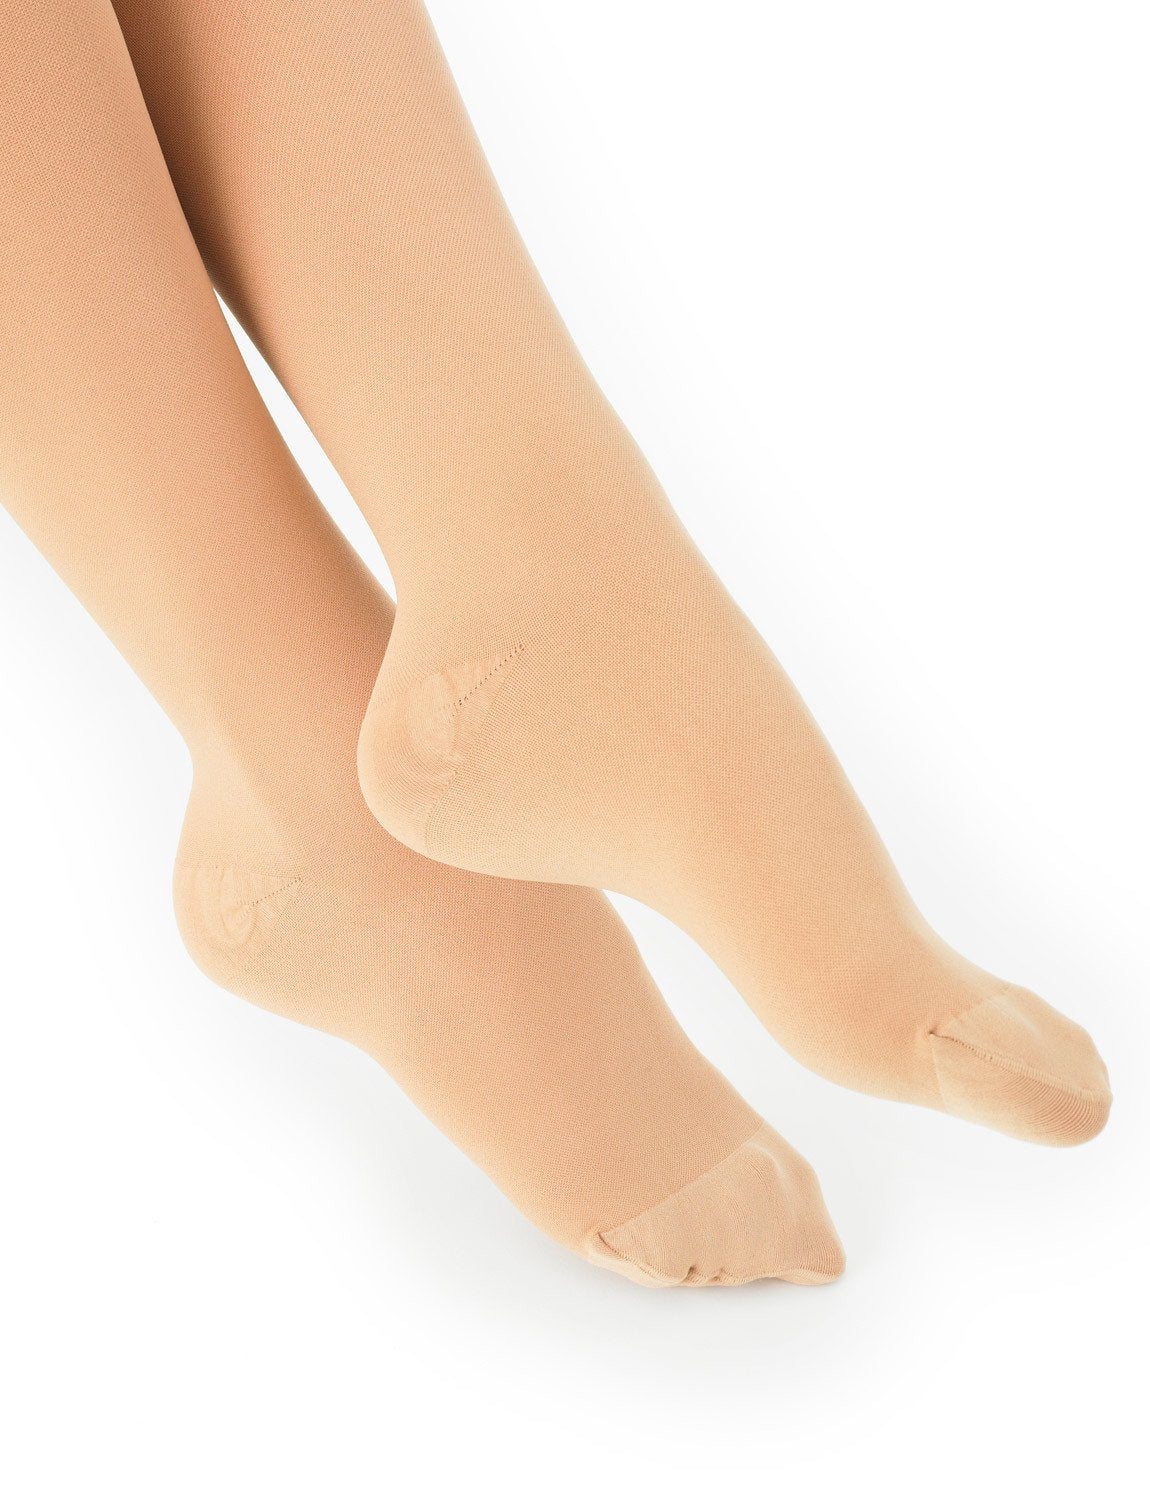 Neo G Thigh High Compression Hosiery (Closed Toe)